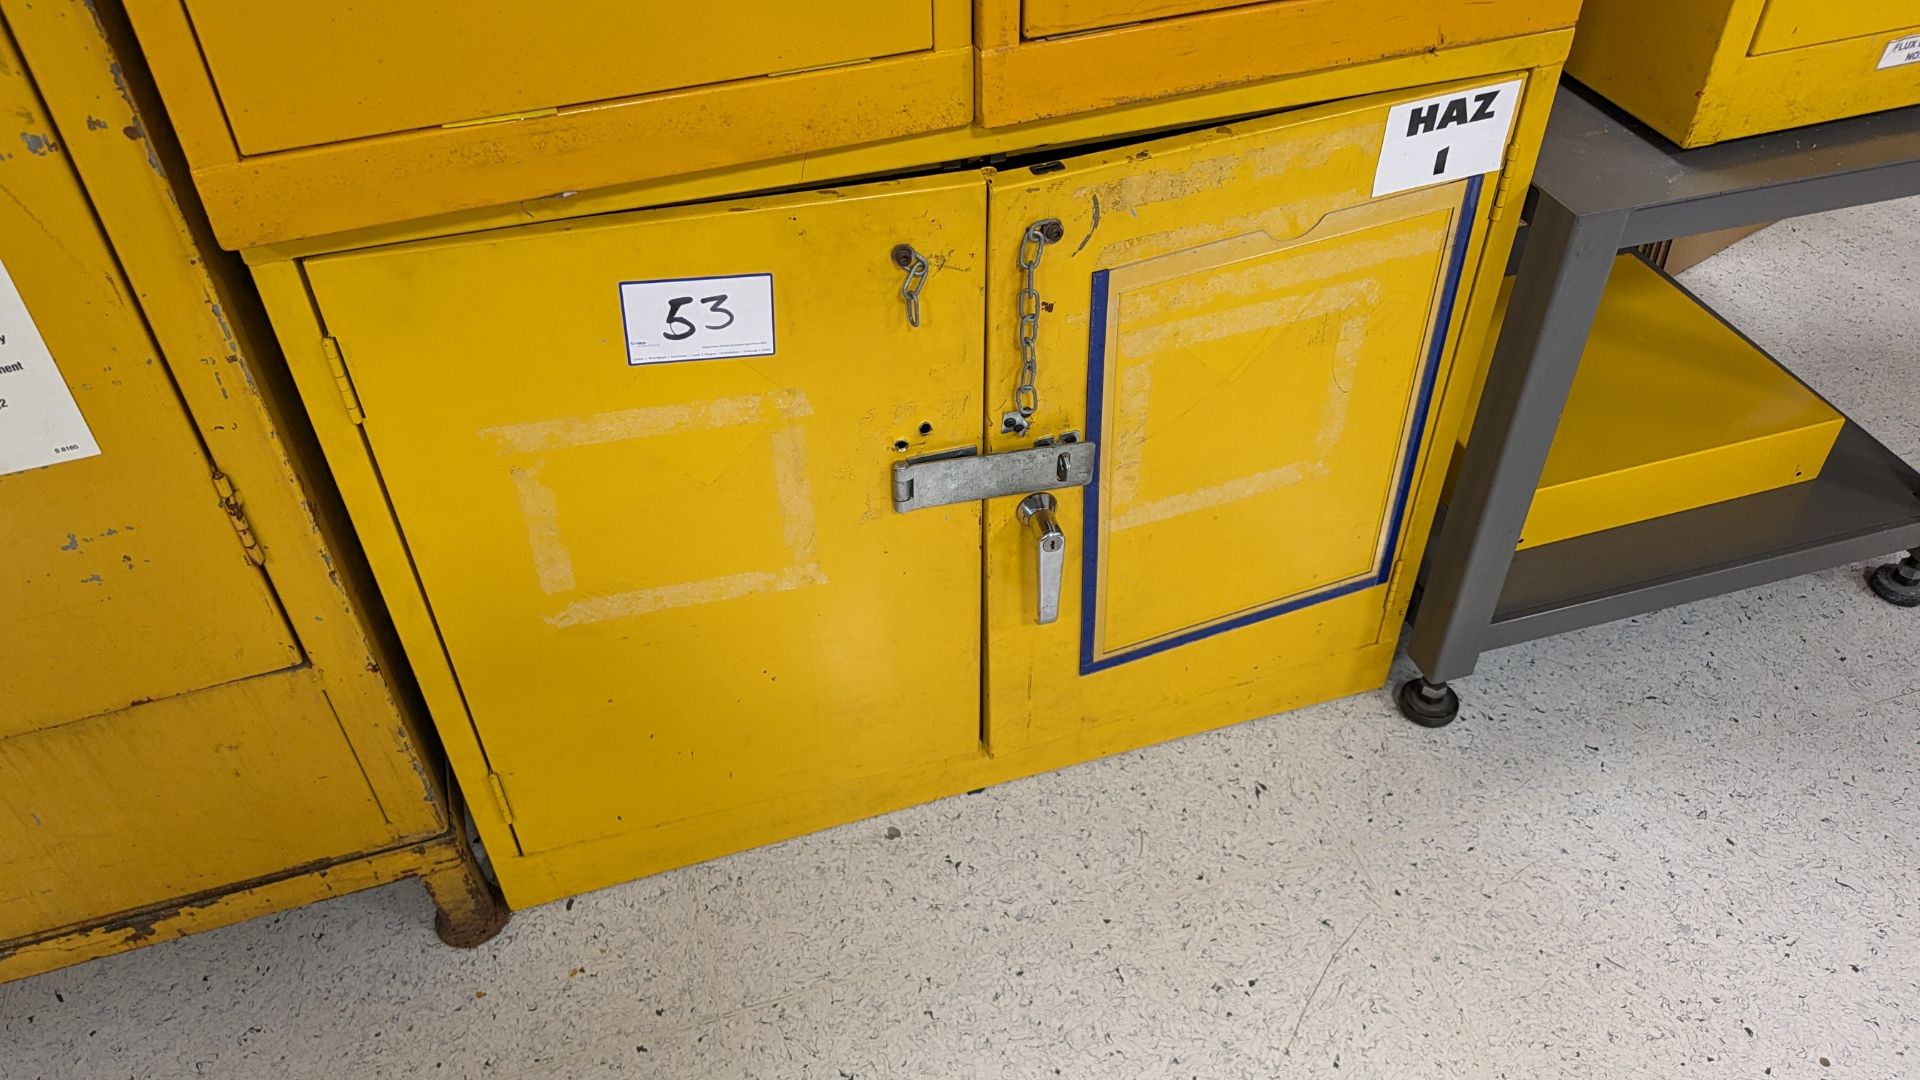 Hazmat Cabinet as lotted